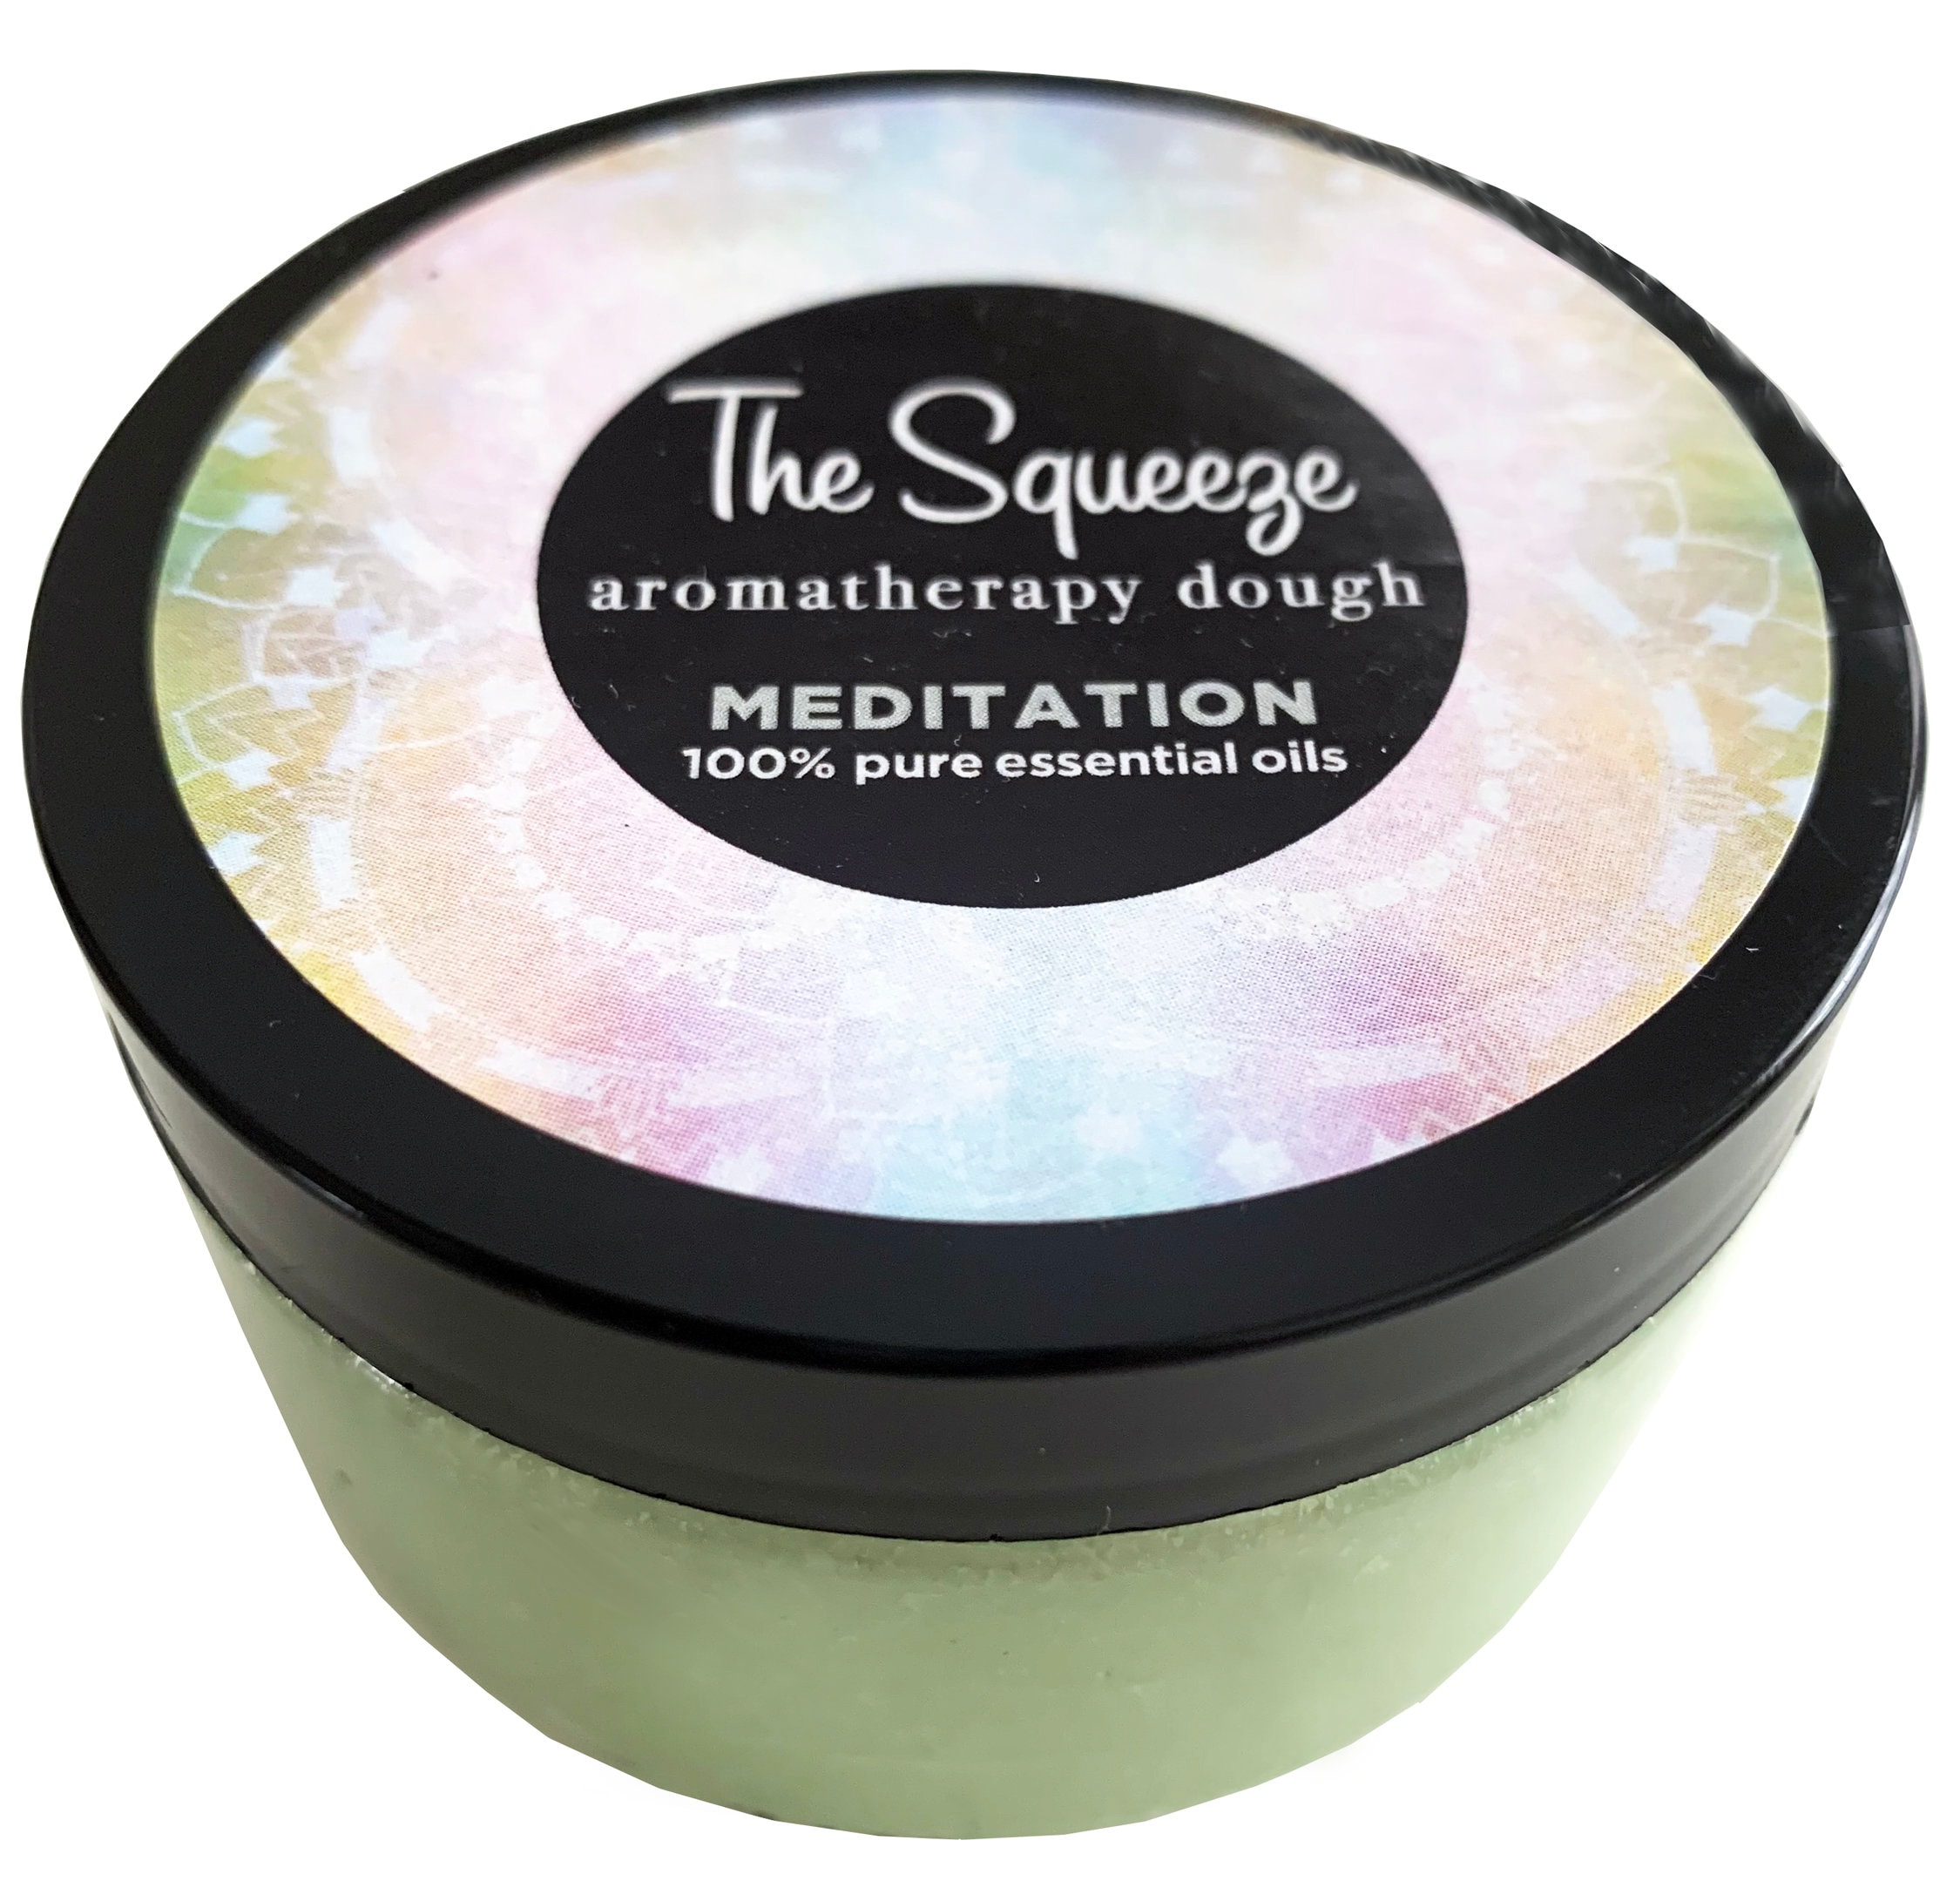 The Squeeze - Meditation Blend Stress Relief Therapy Dough For Self Care, Aromatherapy Ball